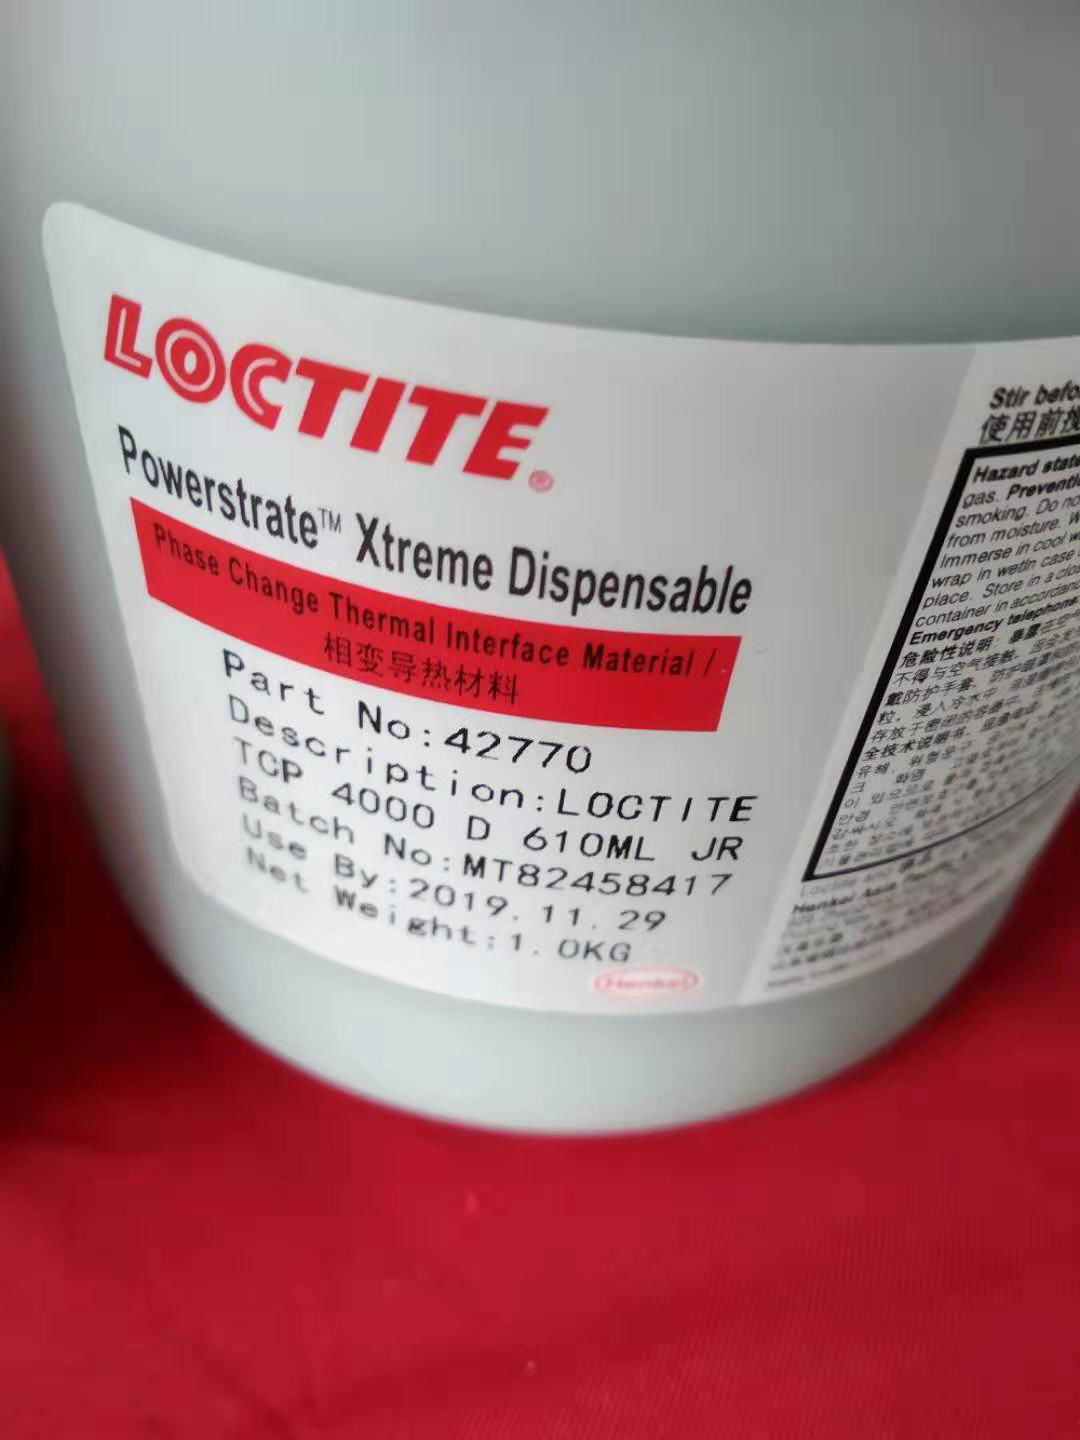 loctite powerstrate xtreme dispensable 2